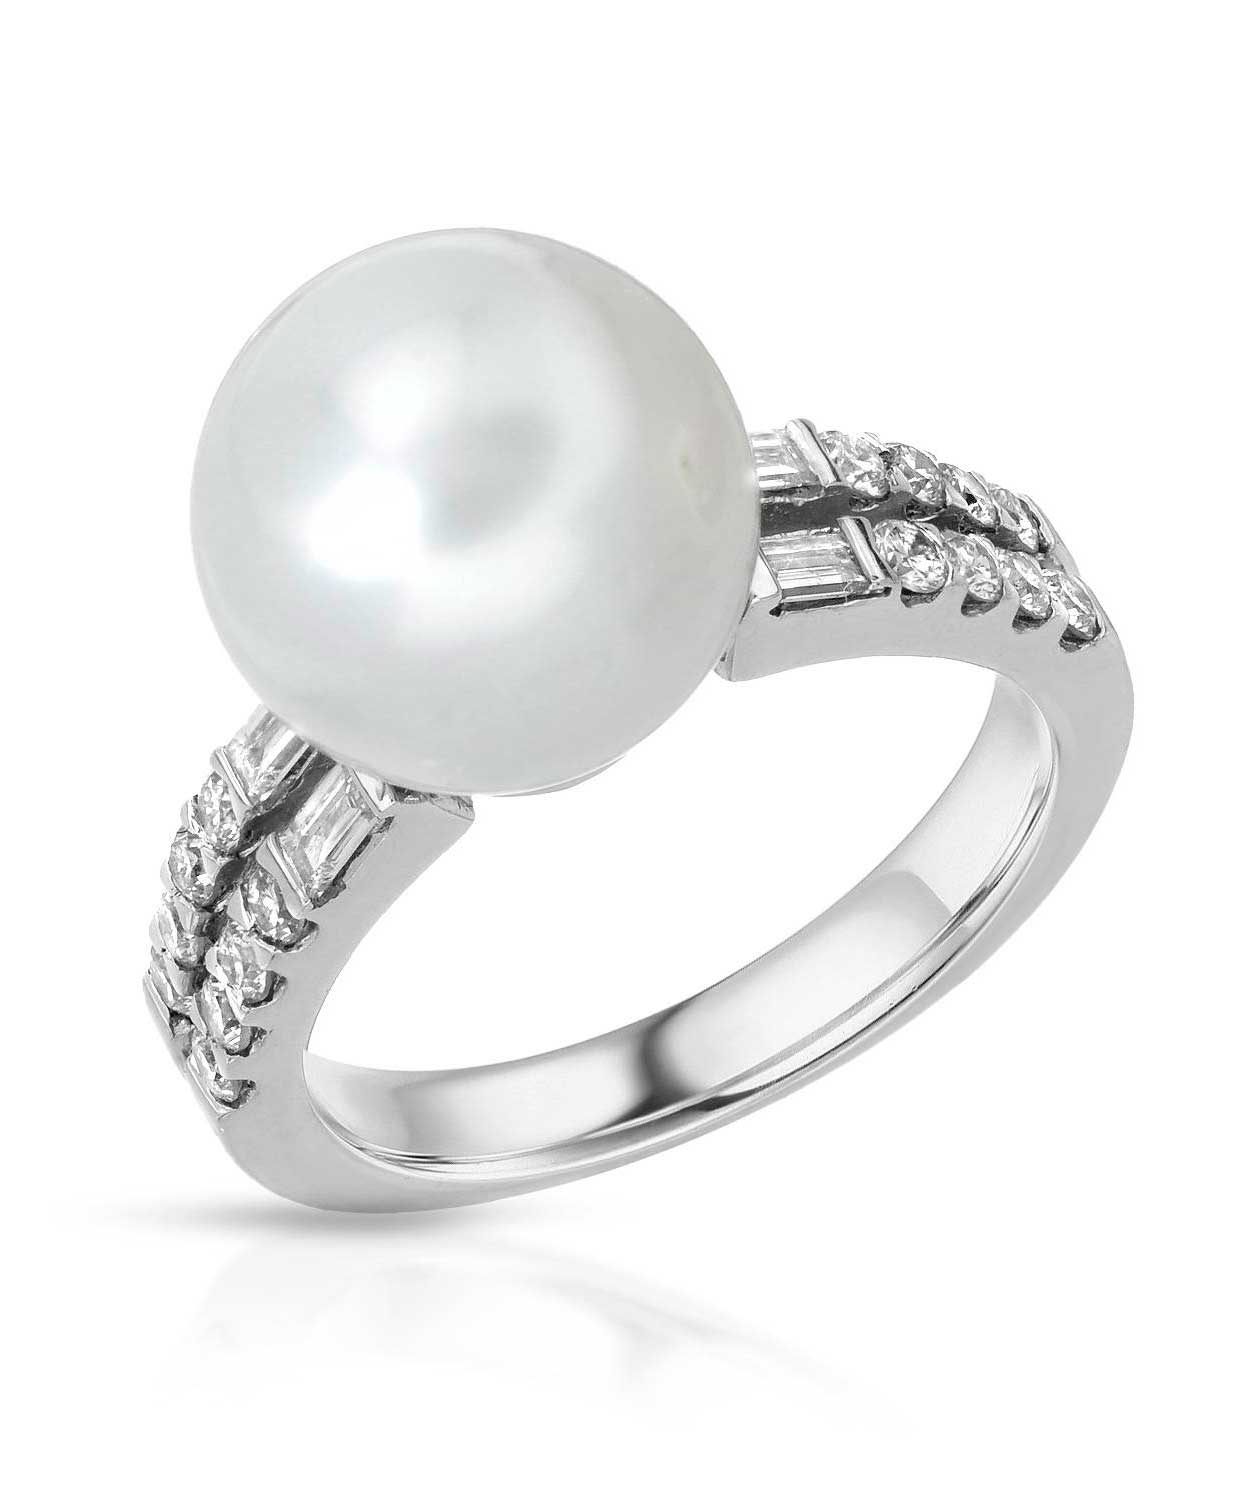 11.0 mm Natural White Freshwater Pearl and 0.62 ctw Diamond 14k Gold Classic Ring View 1